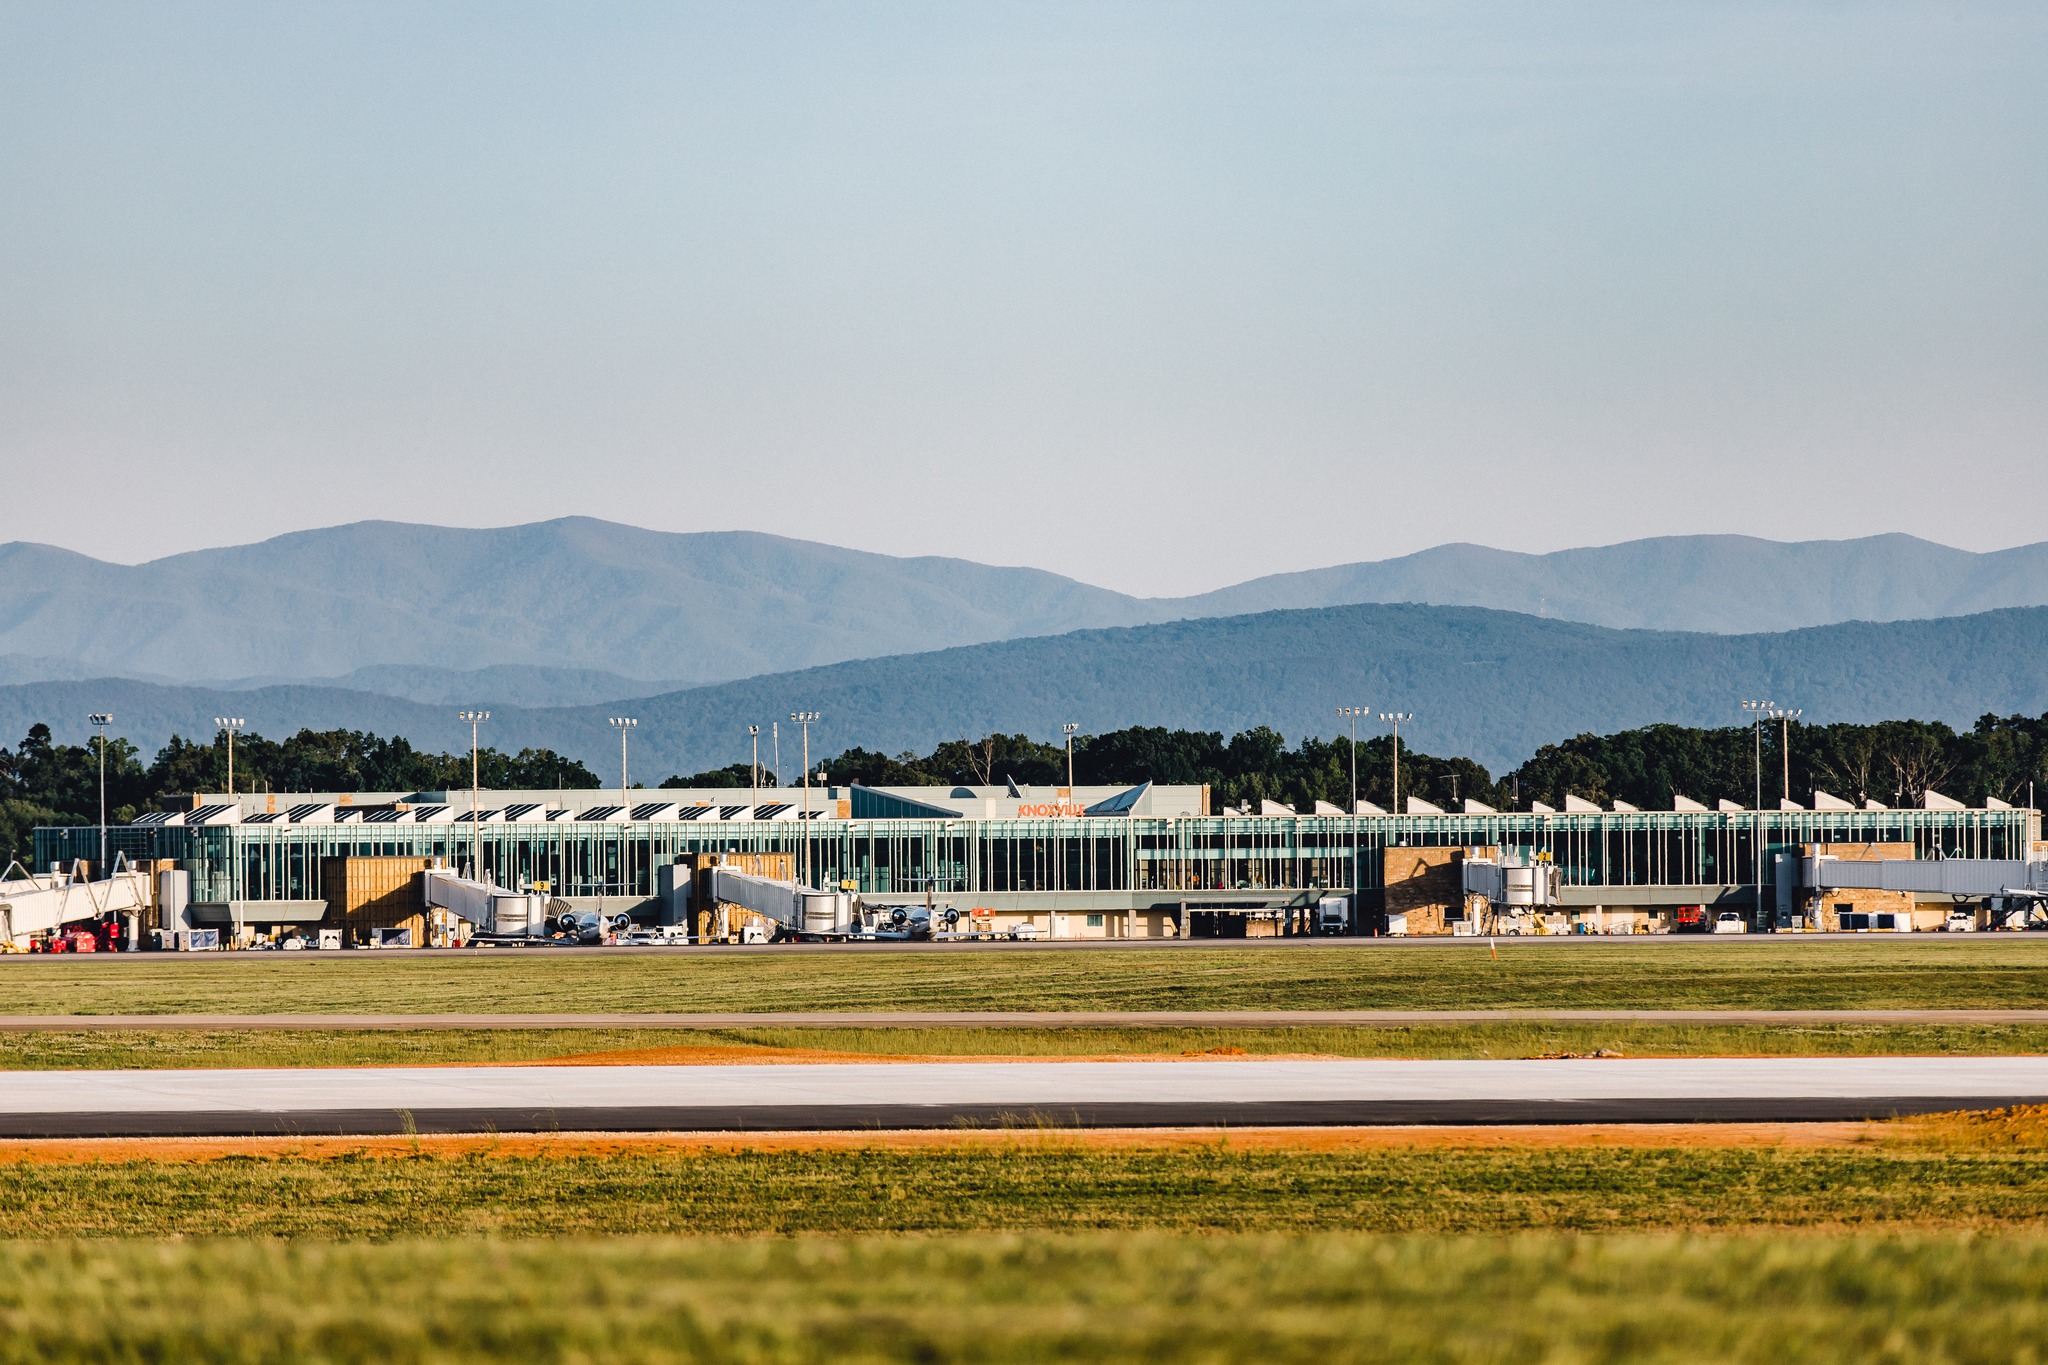 McGhee Tyson Airport currently processes around 2.7 million passengers each year